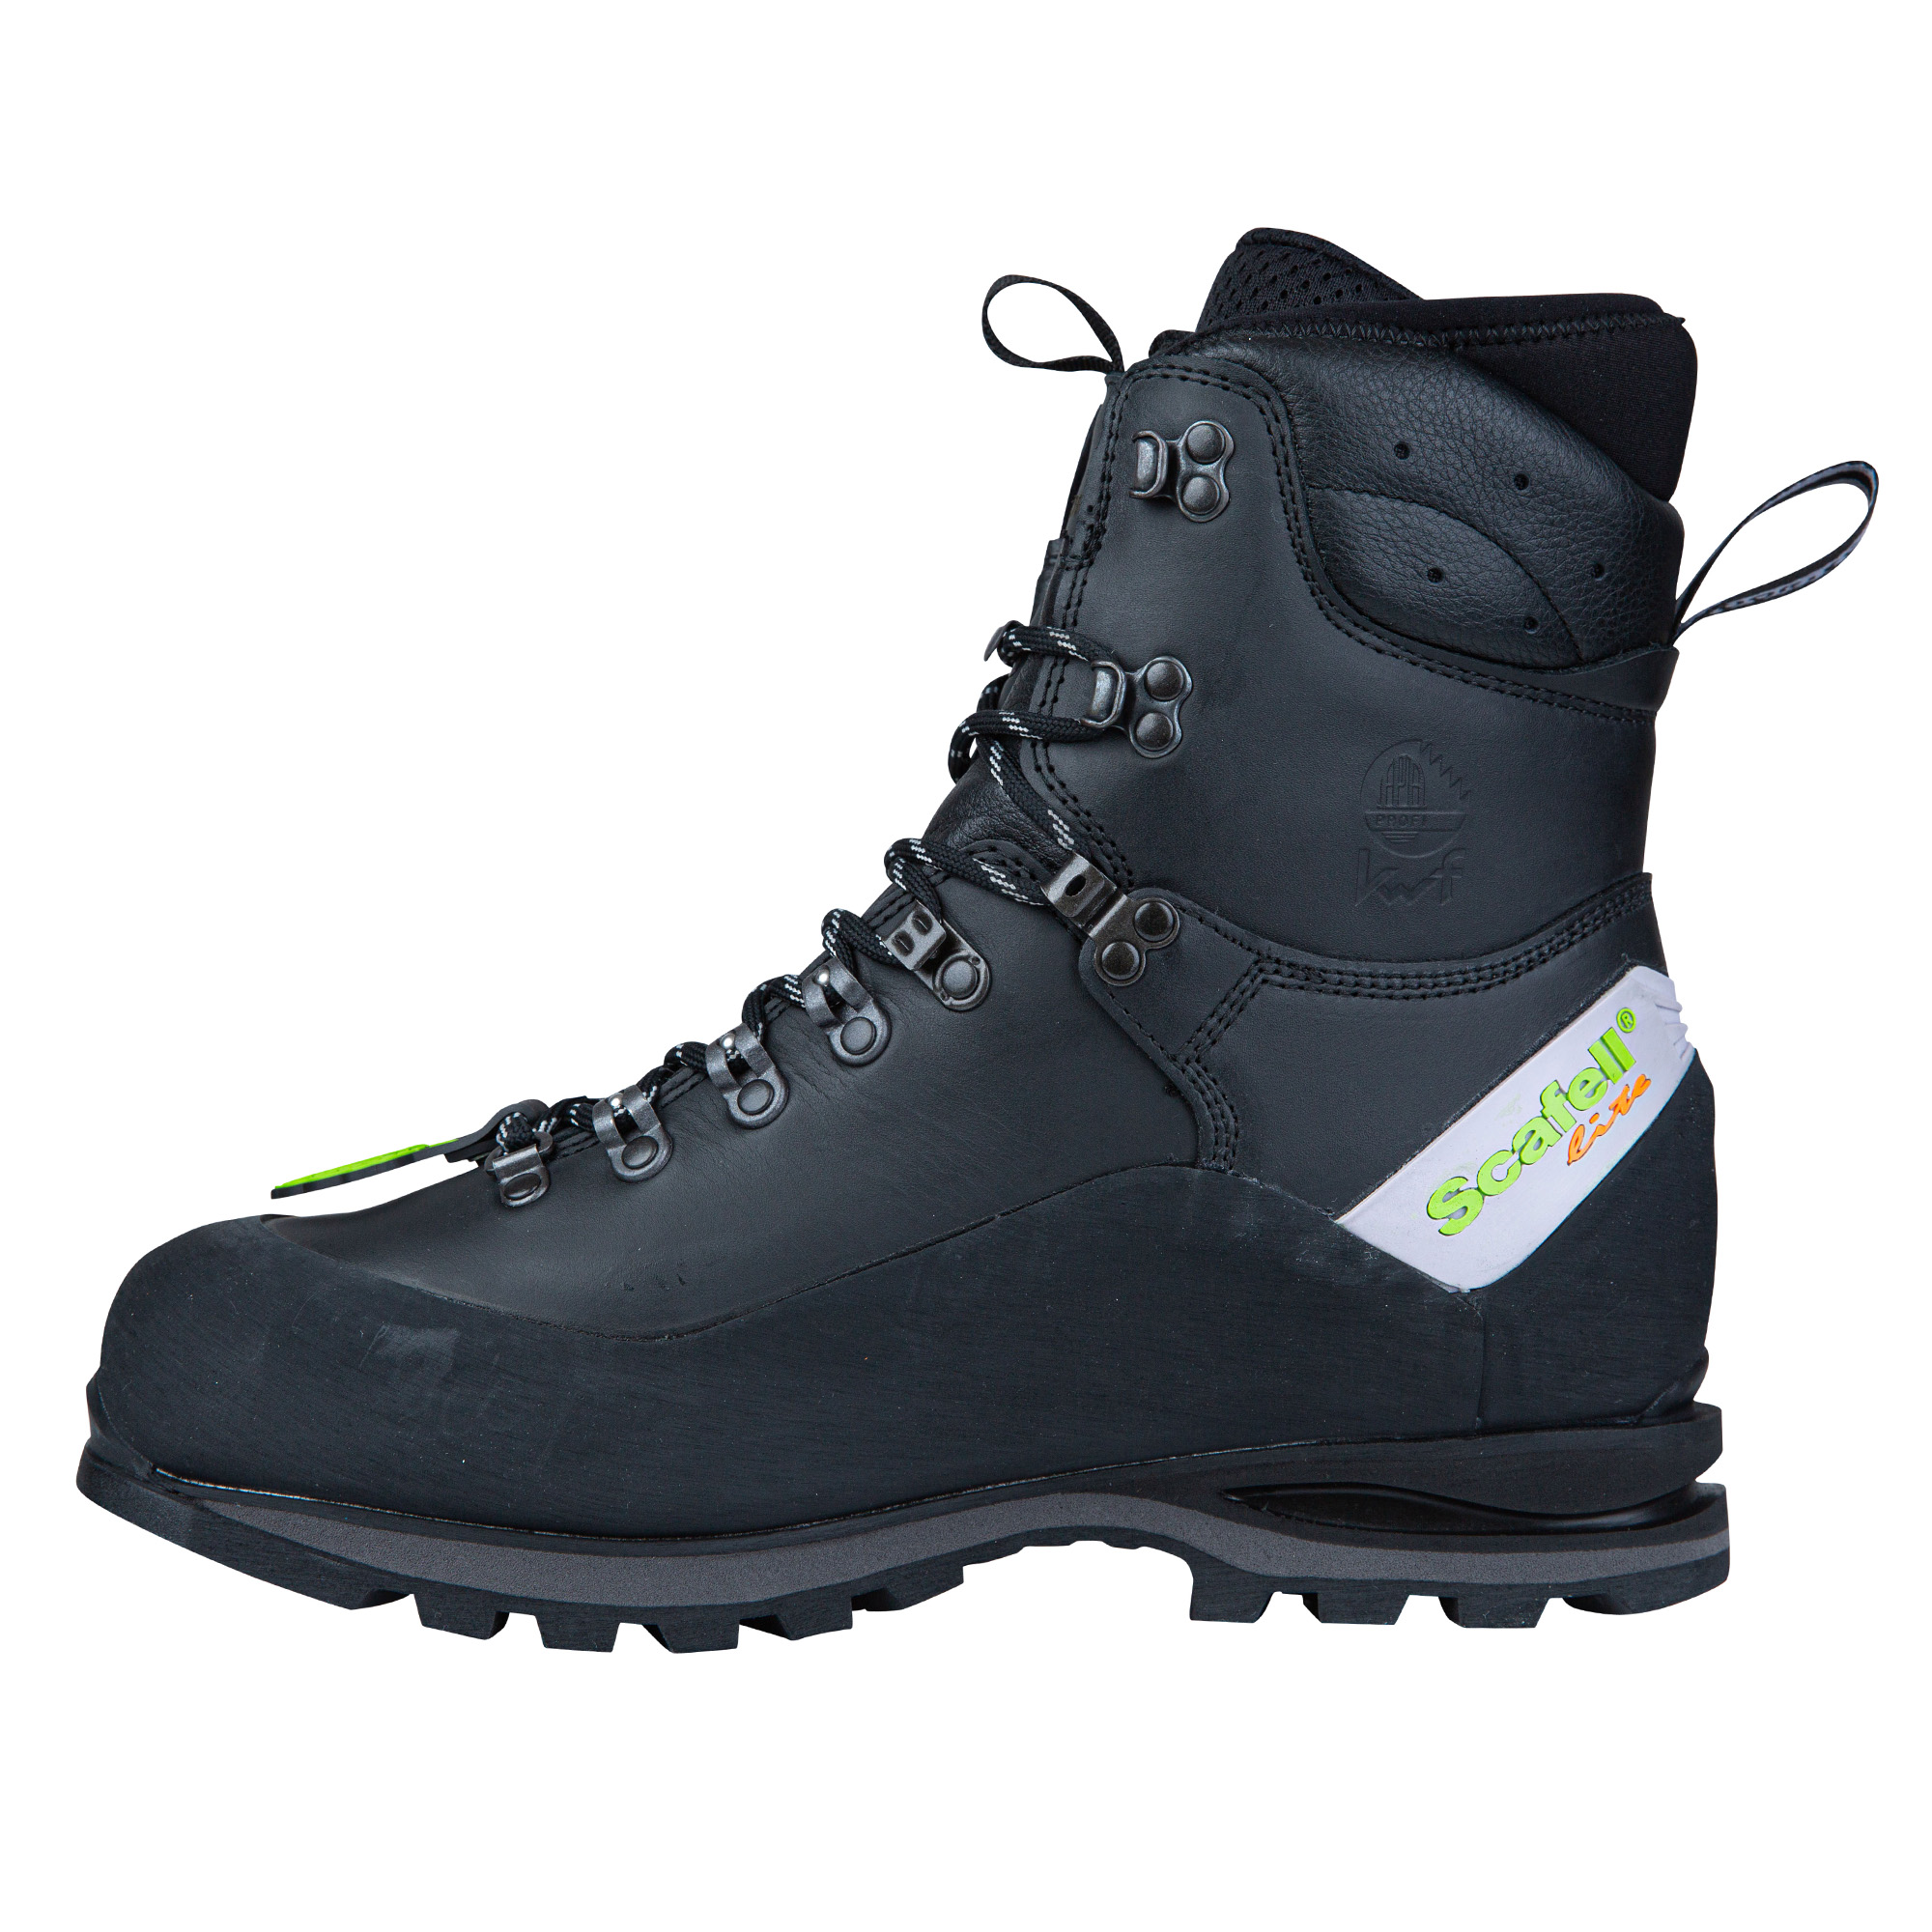 AT33000 Scafell Lite Class 2 Chainsaw Boot - Black - Cobrook